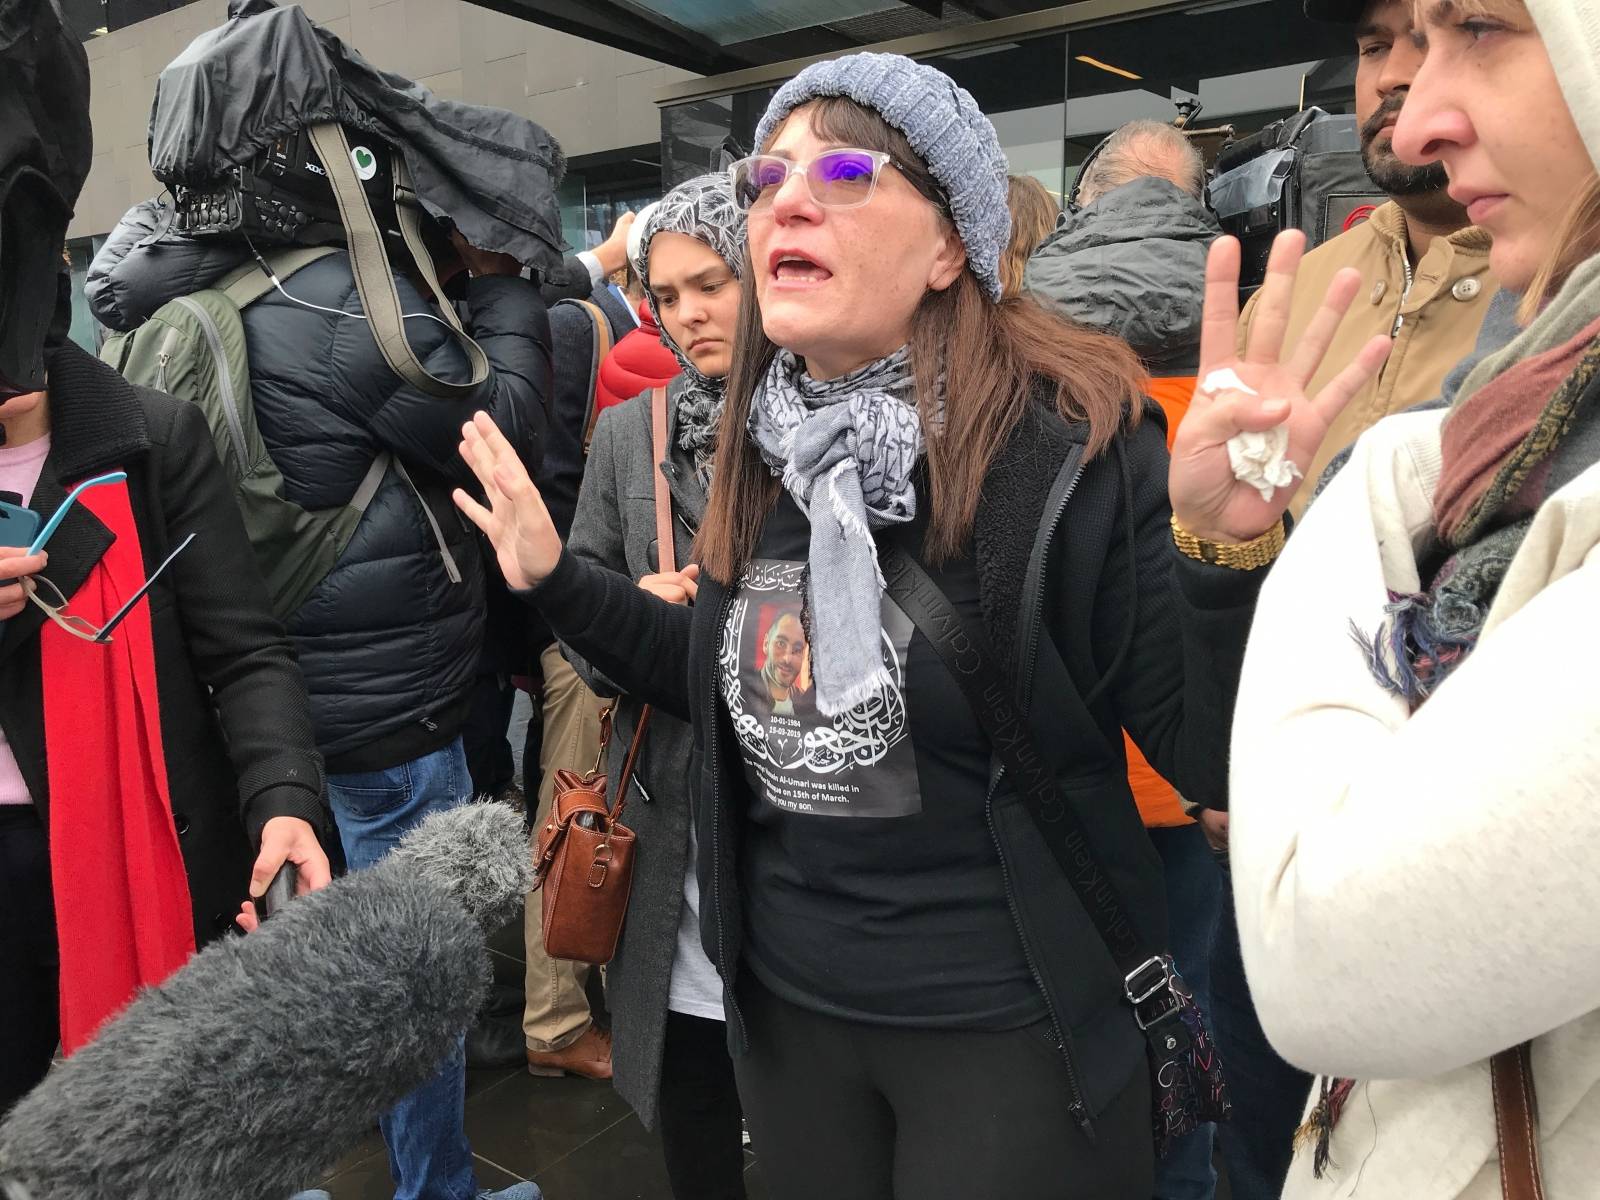 Janna Ezat, wearing a T-shirt in memorial of her son who was killed at Al Noor mosque on March 15, reacts outside the Christchurch High Court after accused gunman Brenton Tarrant pleaded not guilty to all charges, New Zealand